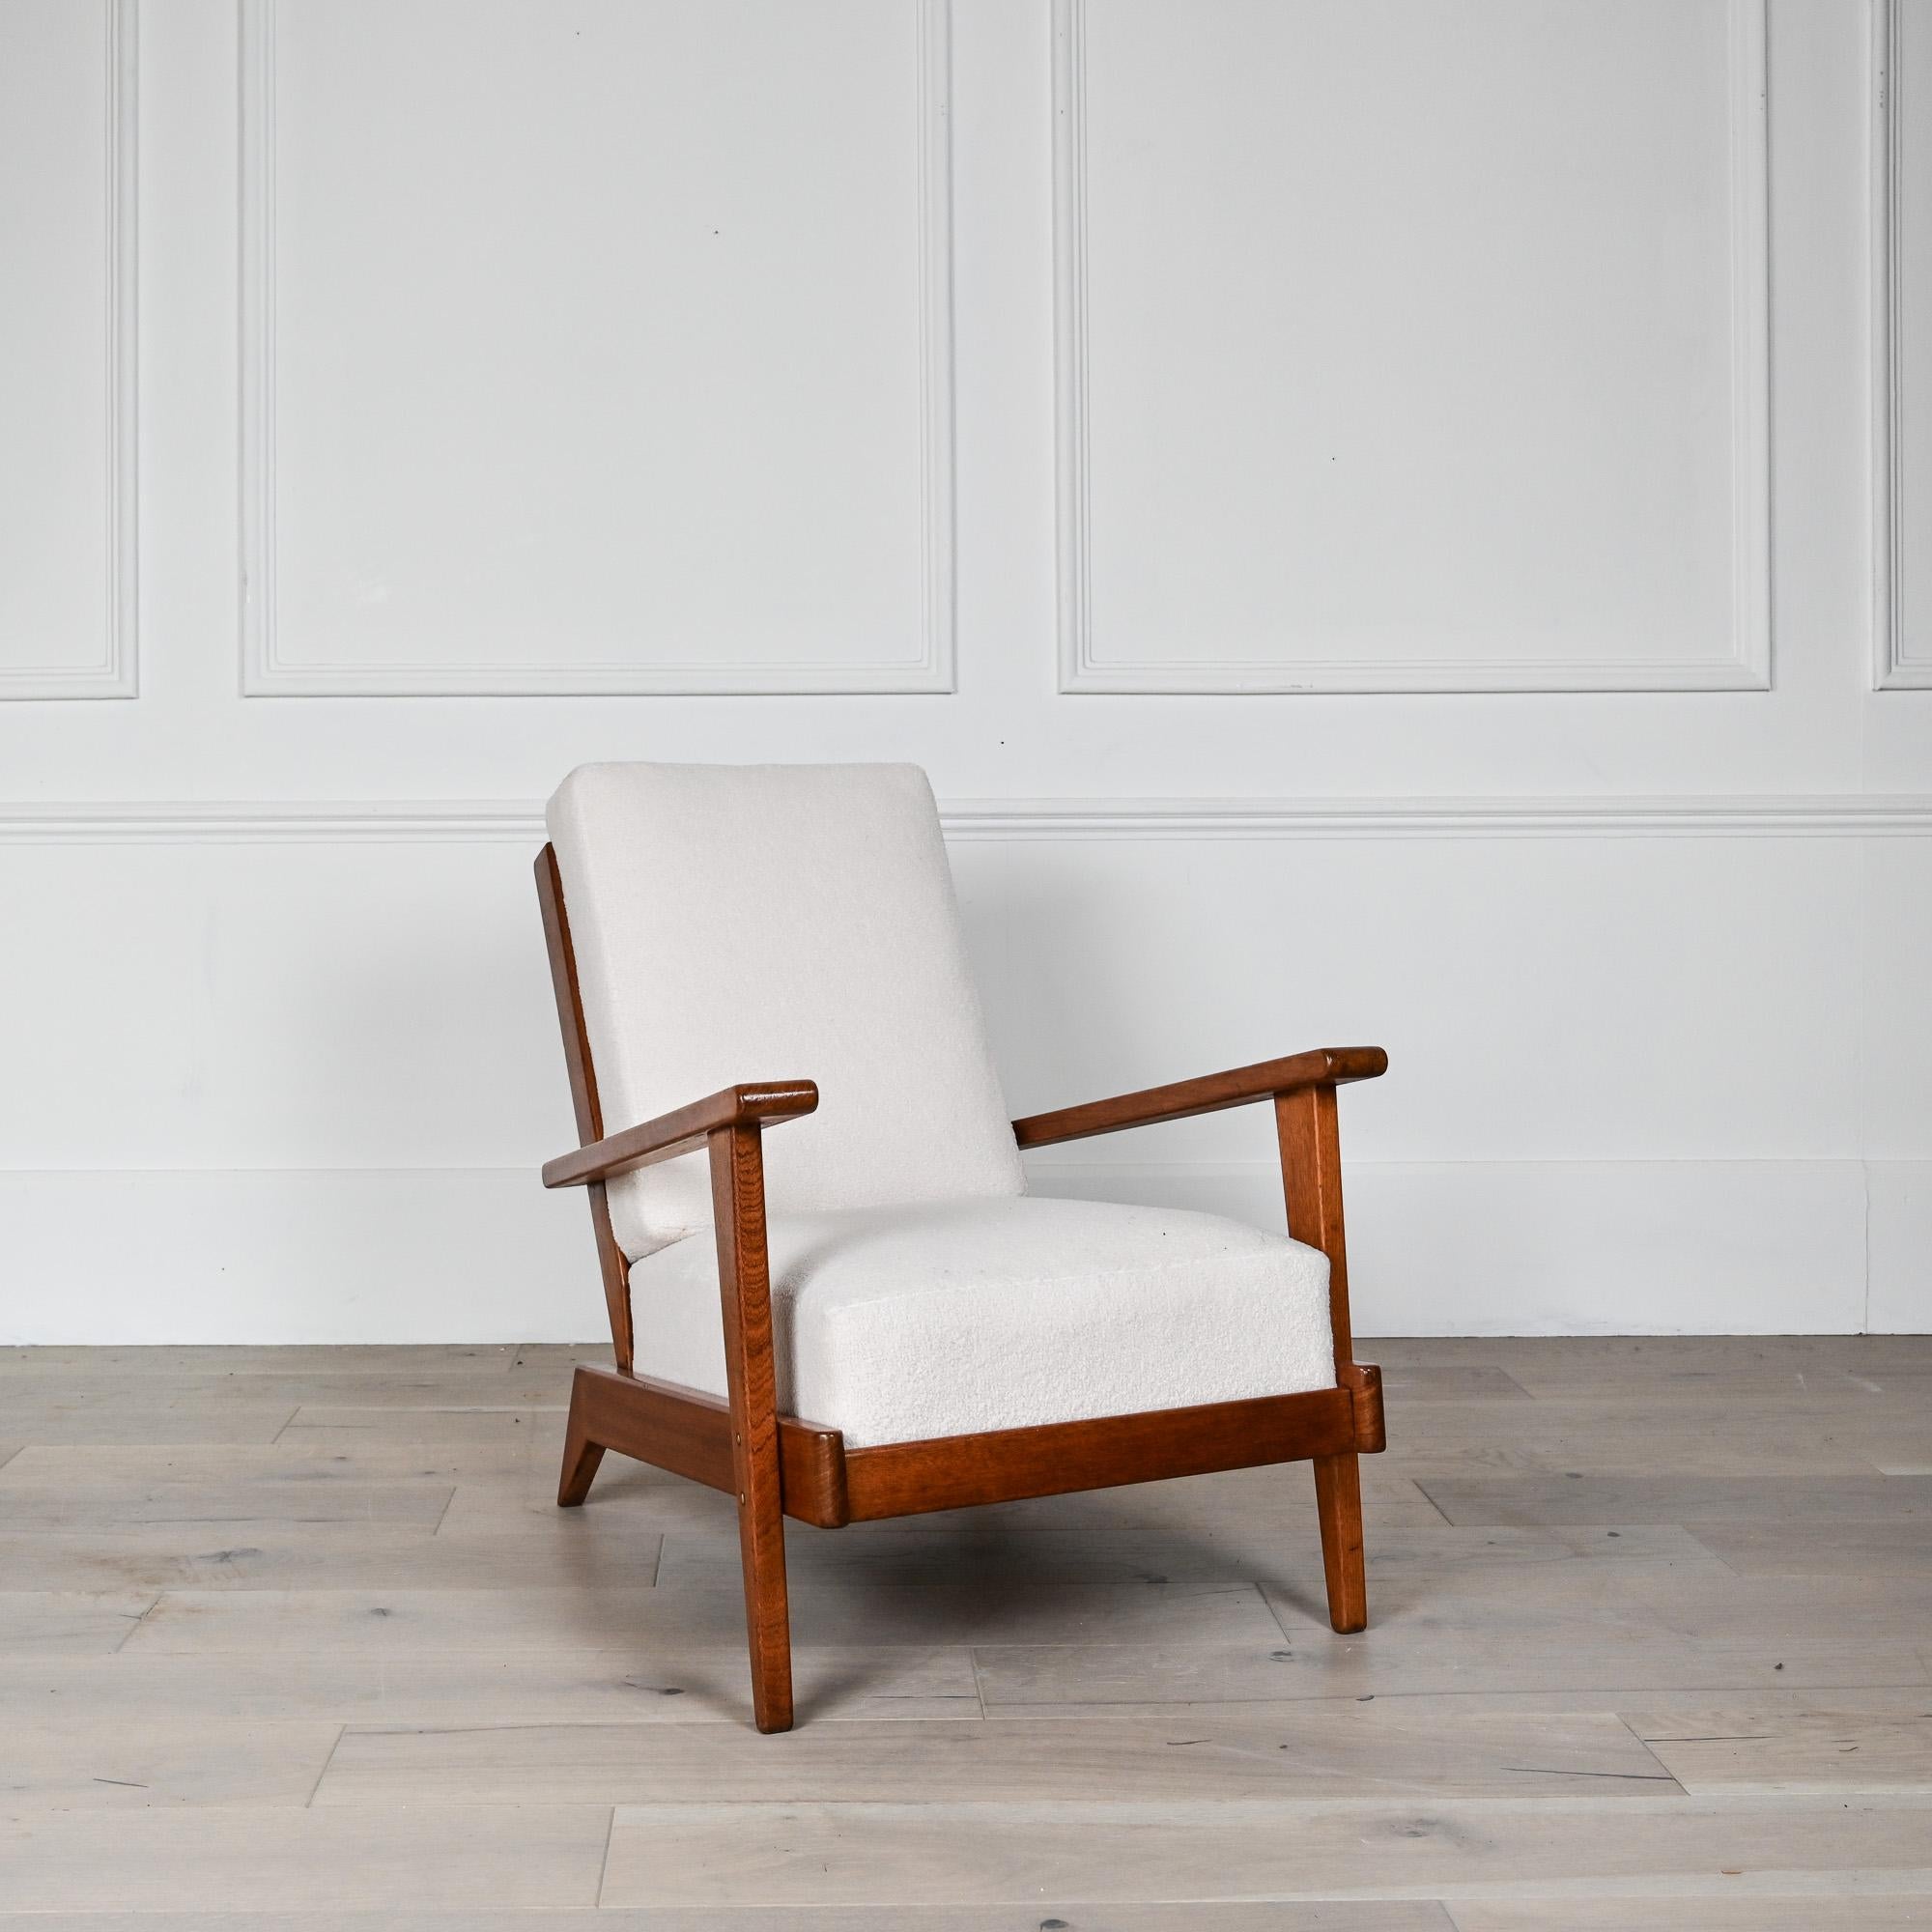 1950s armchair by French designer André Sornay.
Timber frame with upholstered drop in seat and drop in back cushion.
Good vintage condition for this rare sought after armchair.

André Sornay created furniture with resolutely modern lines. Influenced